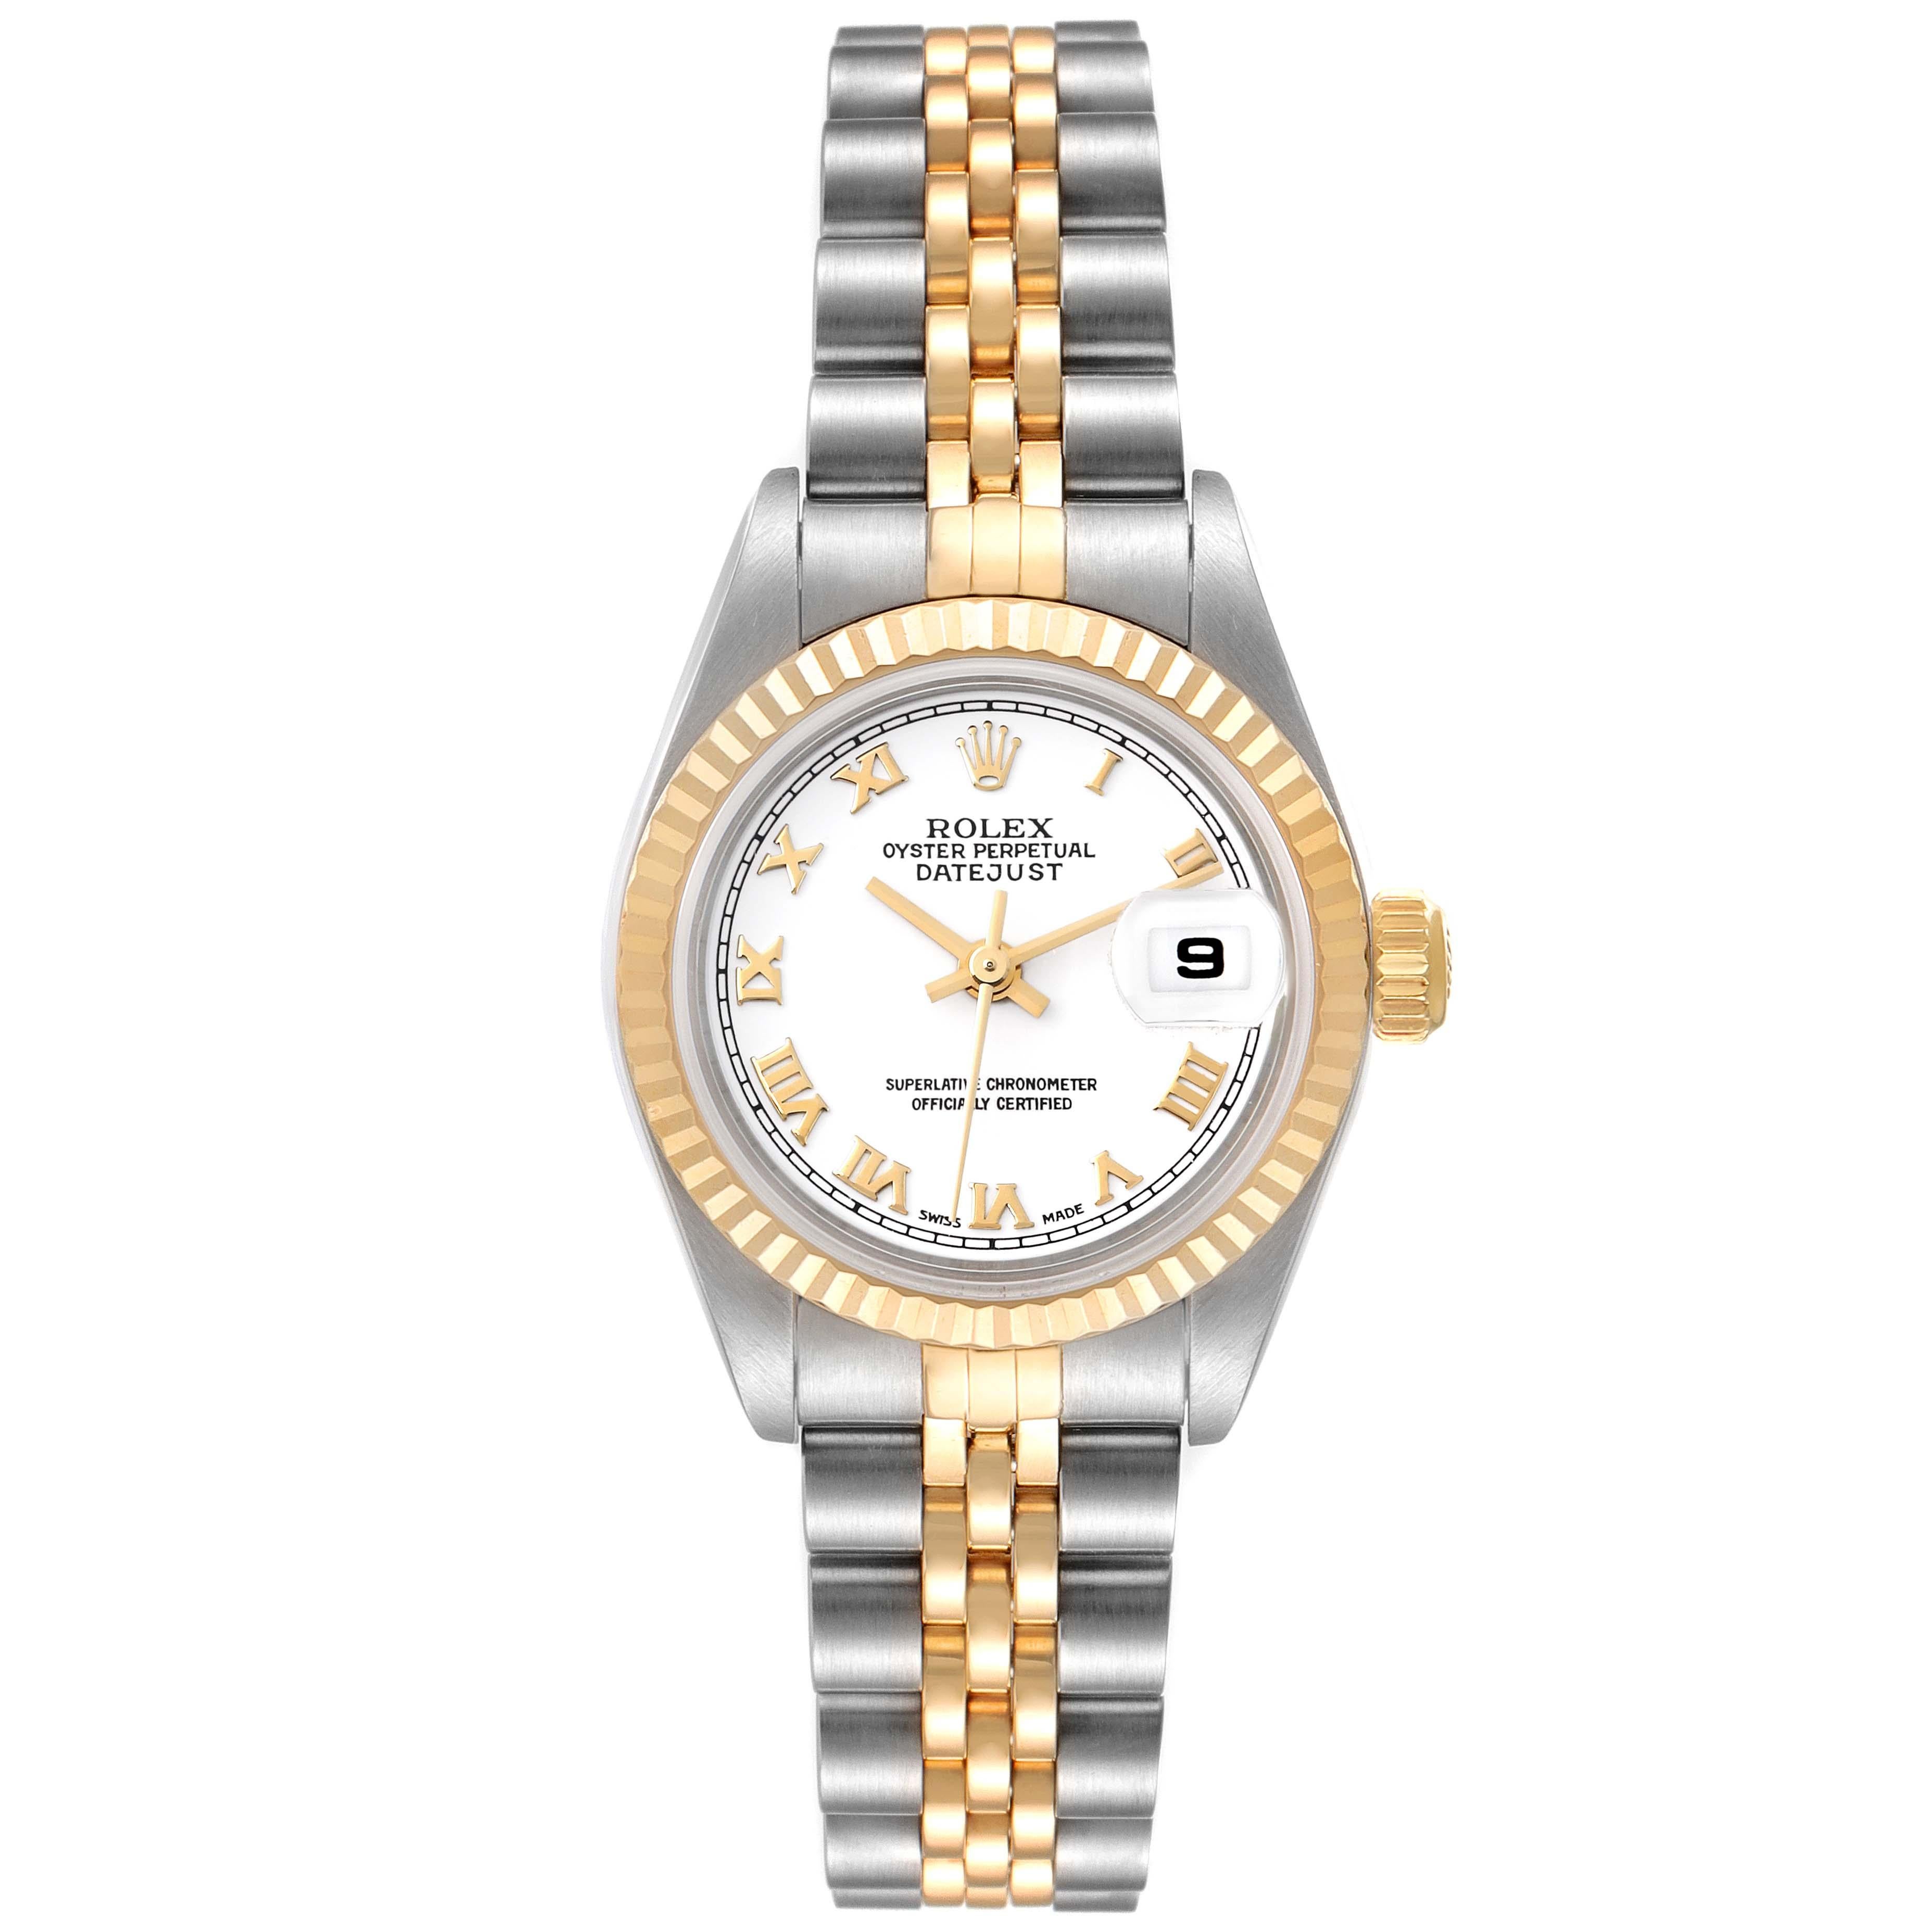 Rolex Datejust Steel Yellow Gold White Dial Ladies Watch 79173. Officially certified chronometer automatic self-winding movement with quickset date function. Stainless steel oyster case 26.0 mm in diameter. Rolex logo on an 18K yellow gold crown.